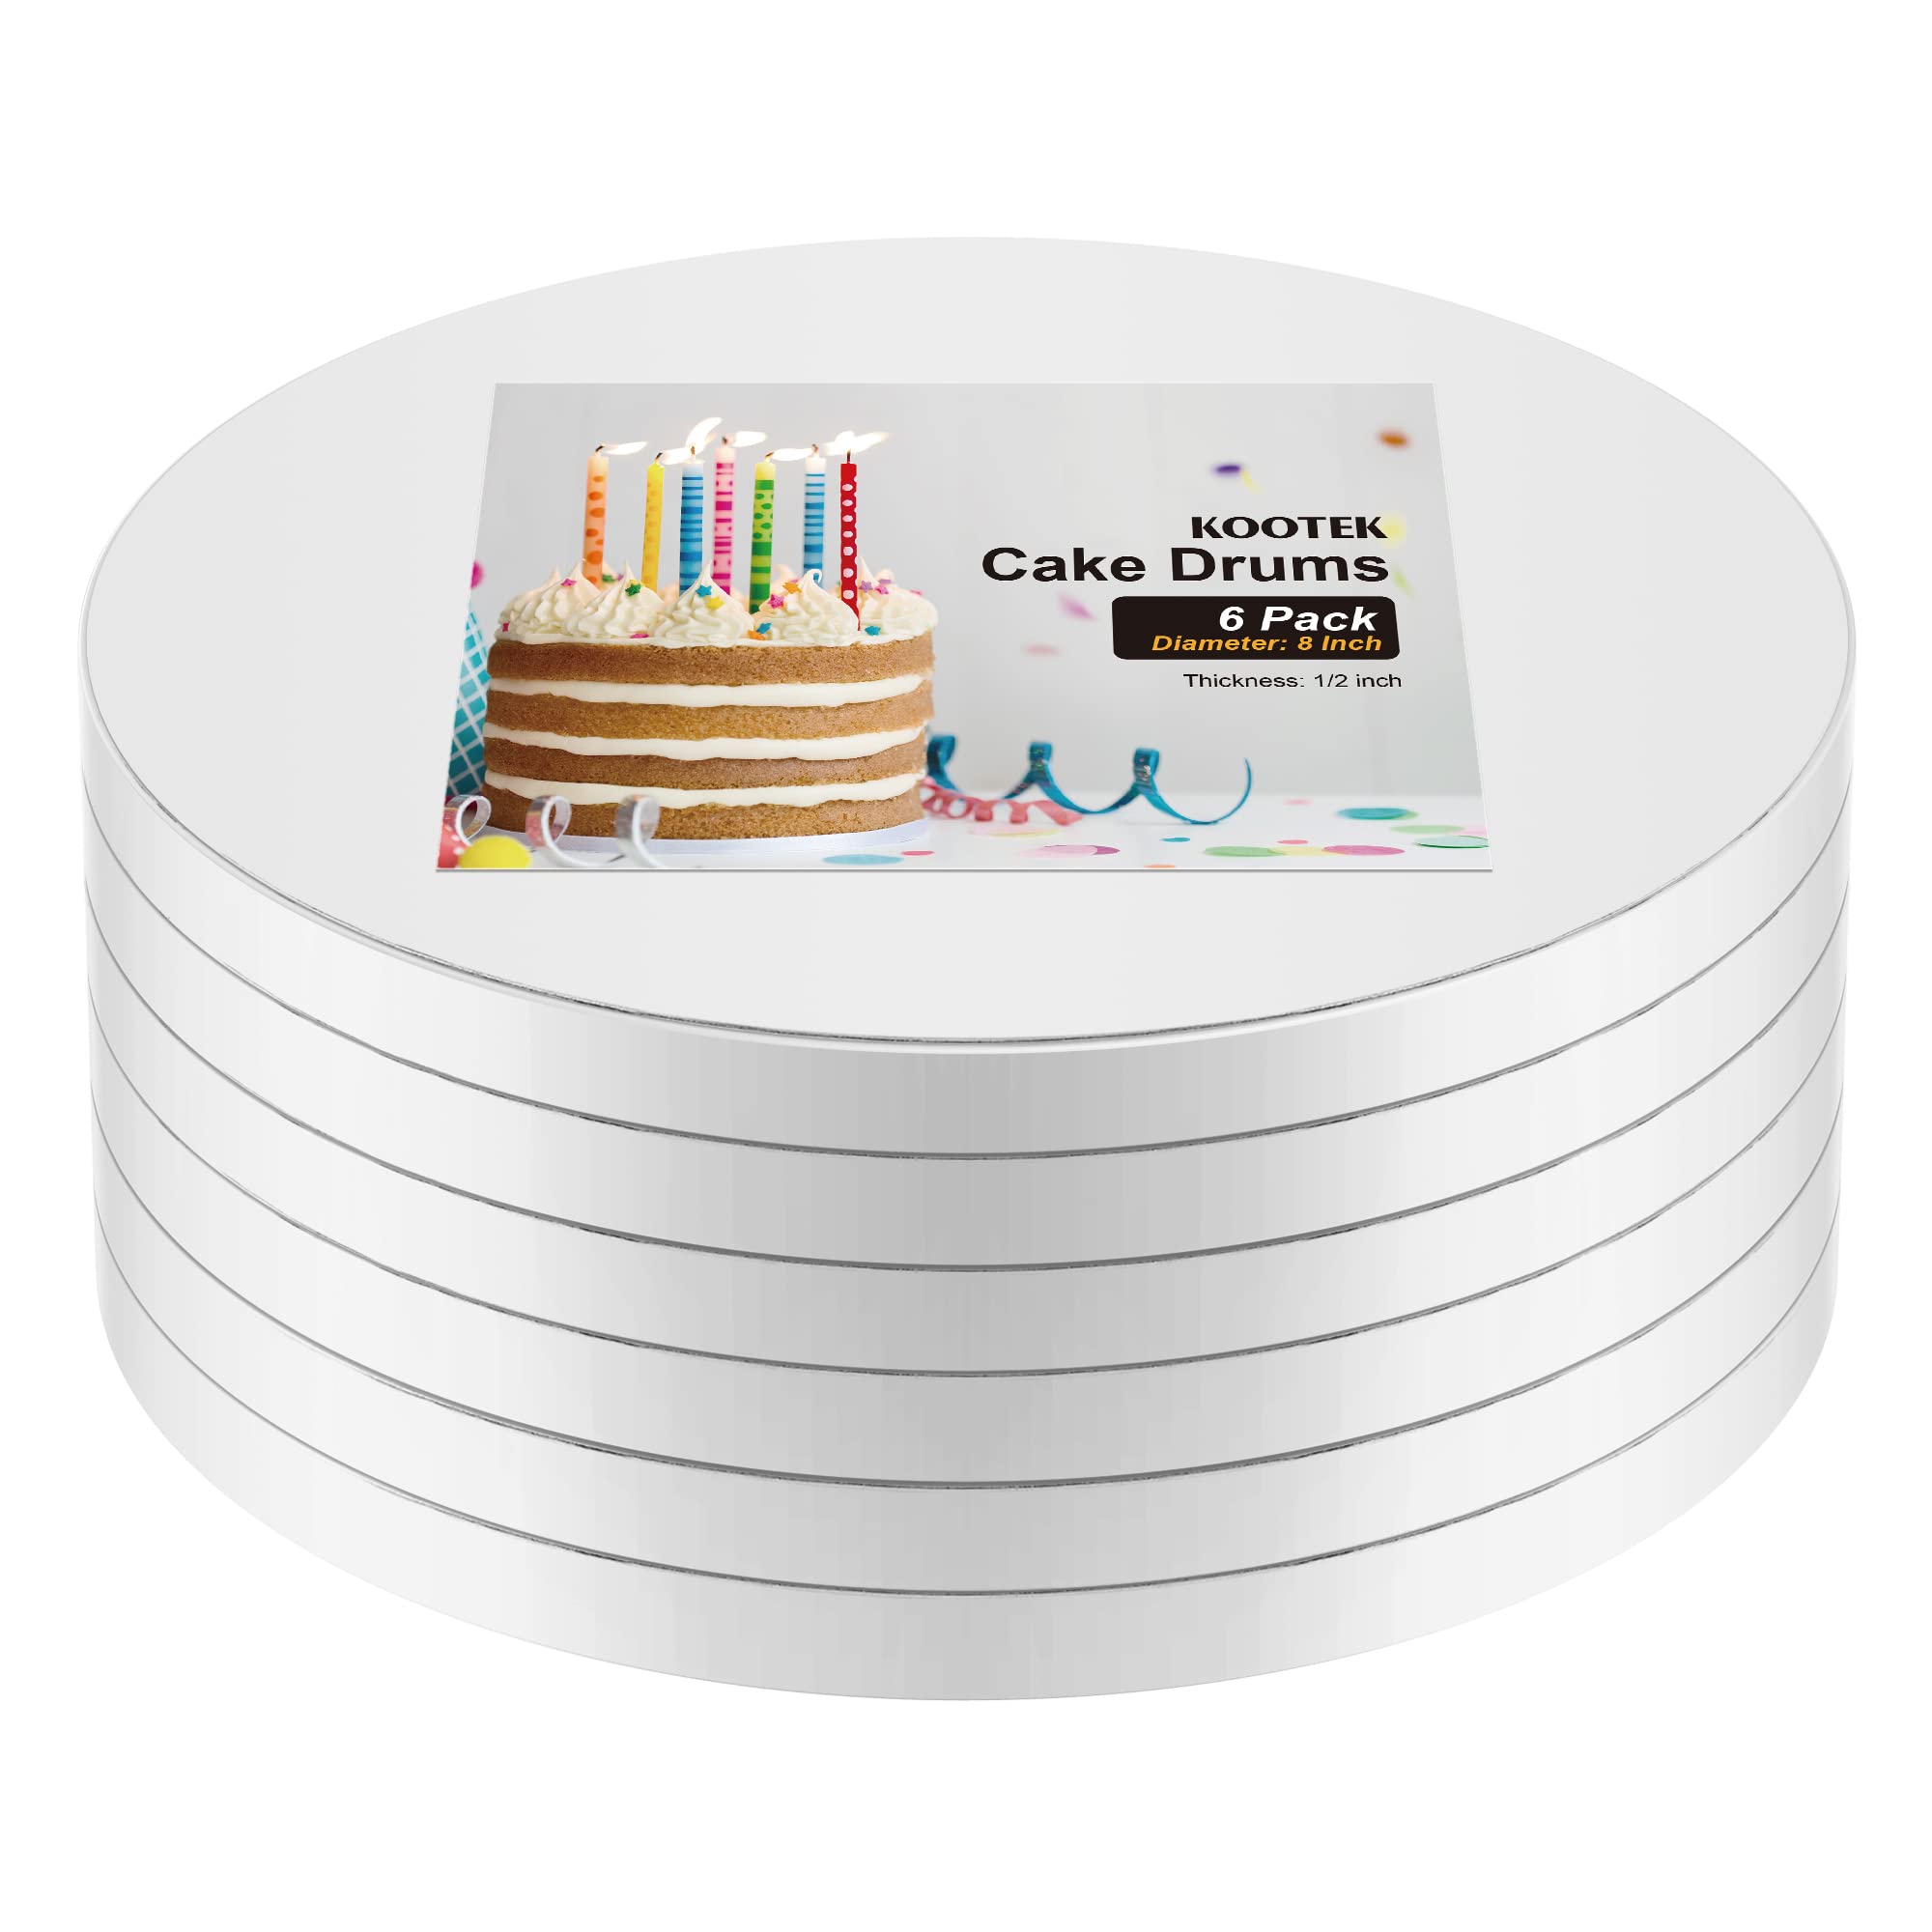 Kootek Cake Boards Drum 8 Inch Round, 1/2" Thick Cake Drums, Cake Decorating Supplies White 6 Pack Sturdy Cake Corrugated Cardboard for Multi-Layer Cakes